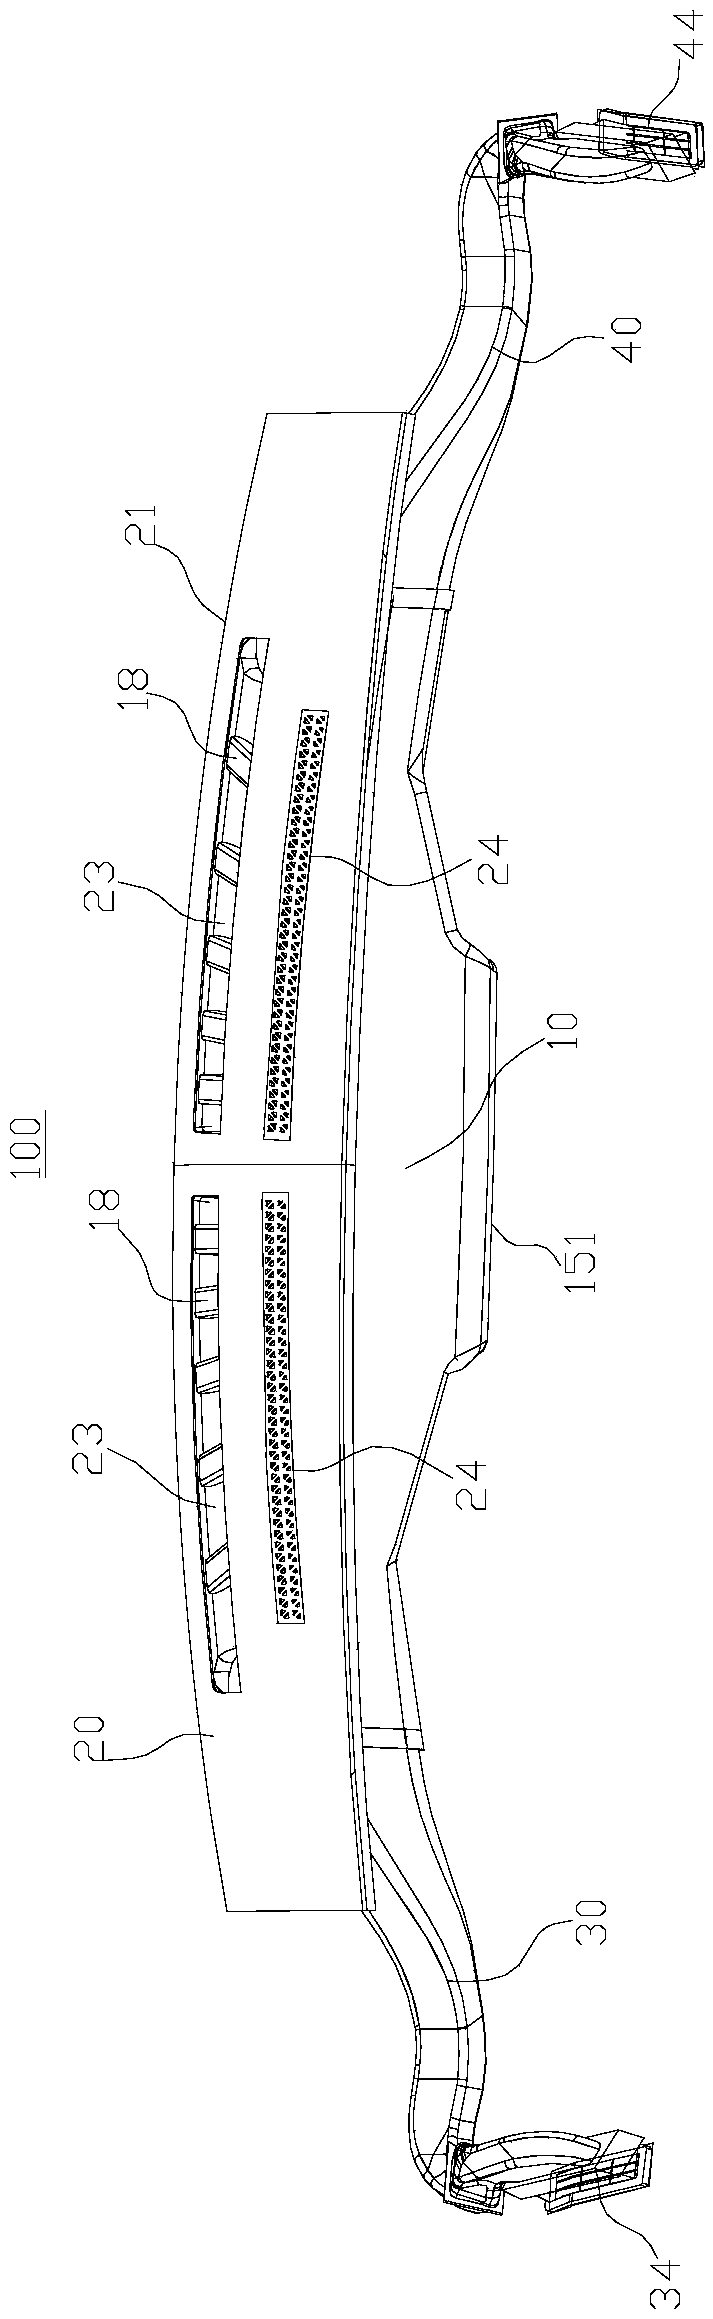 Cover plate, air flue structure and transporting tool